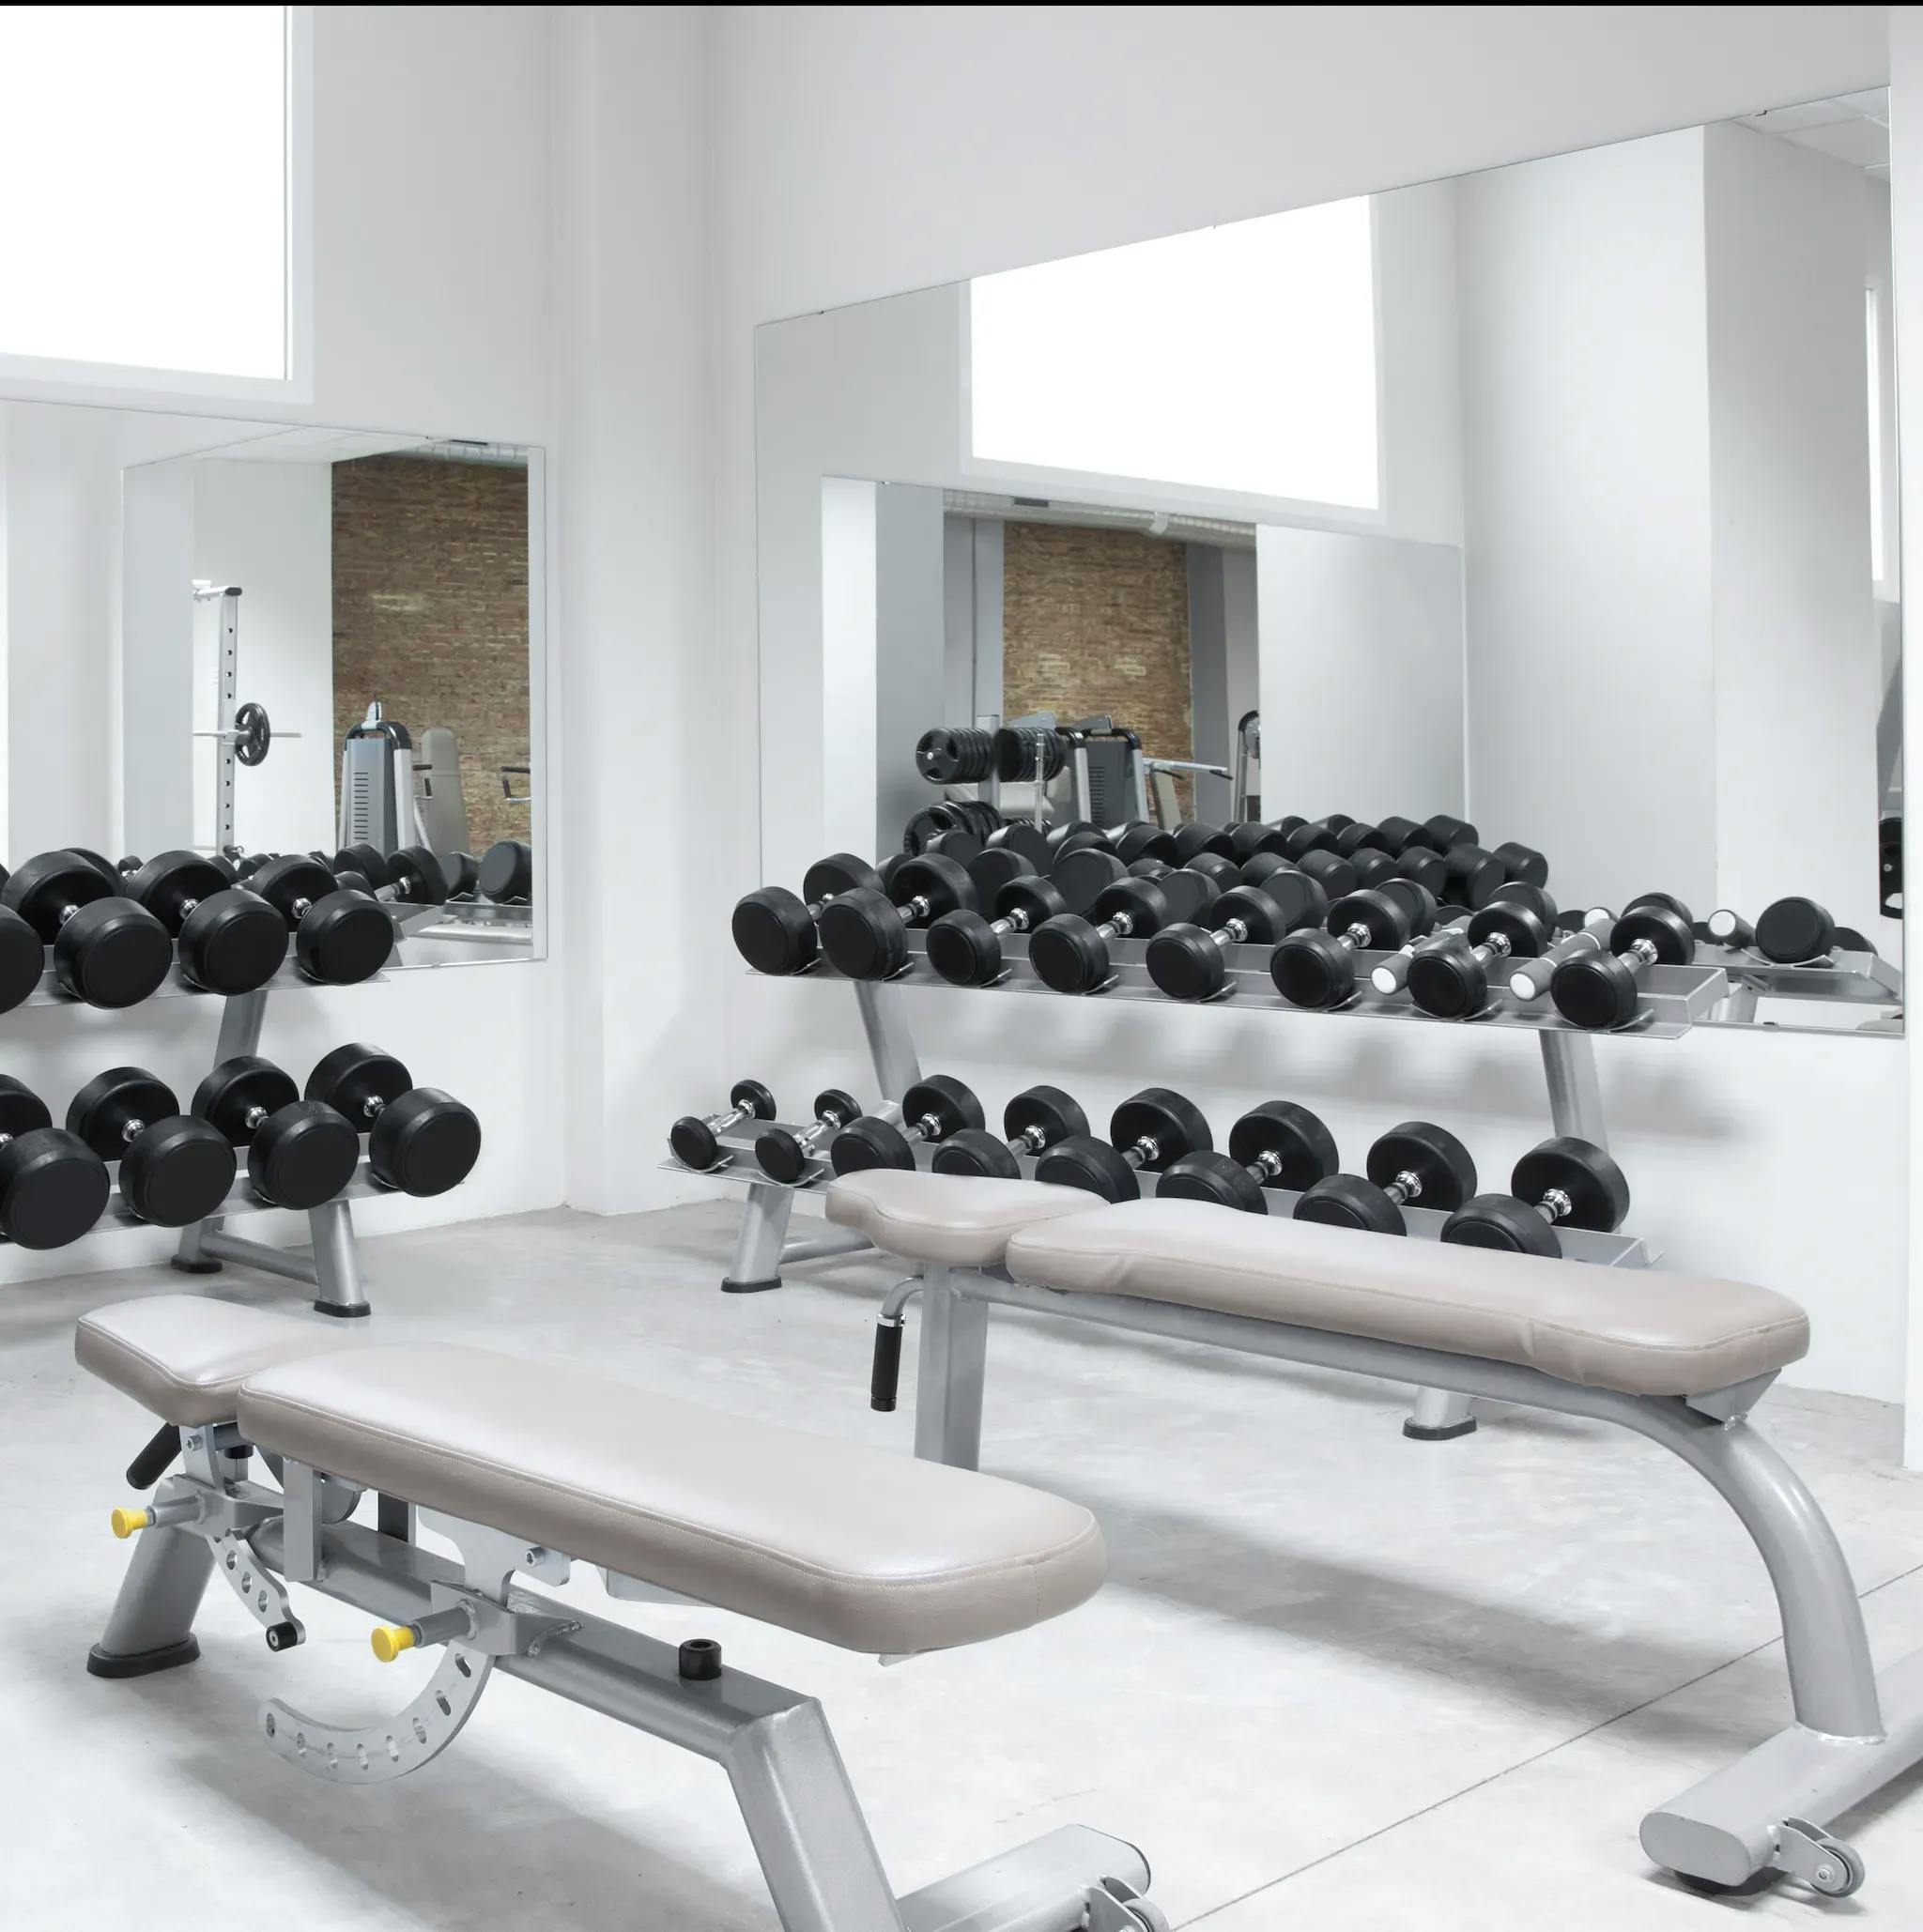 Modern gym setting with two grey benches and two gym mirrors, each facing rows of weightlifting equipment